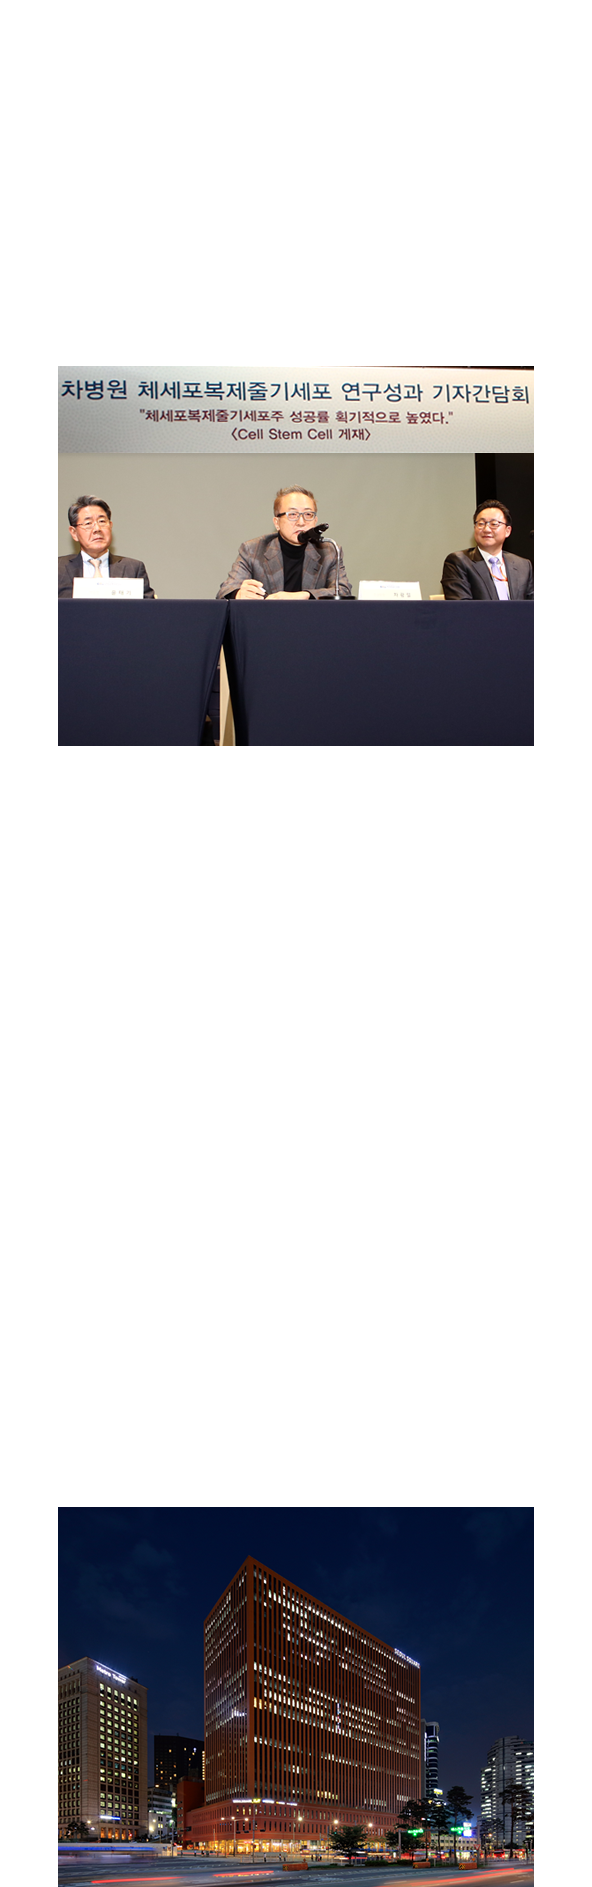 2015 First in Asia to publish a clinical paper on embryonic stem cell for retina cell treatment, First in the world to significantly increase the success rate of Human somatic cell nuclear transfer (published in Cell Stem Cell), Opened CHA Fertility Center Seoul Station, Asia's largest infertility treatment hospital